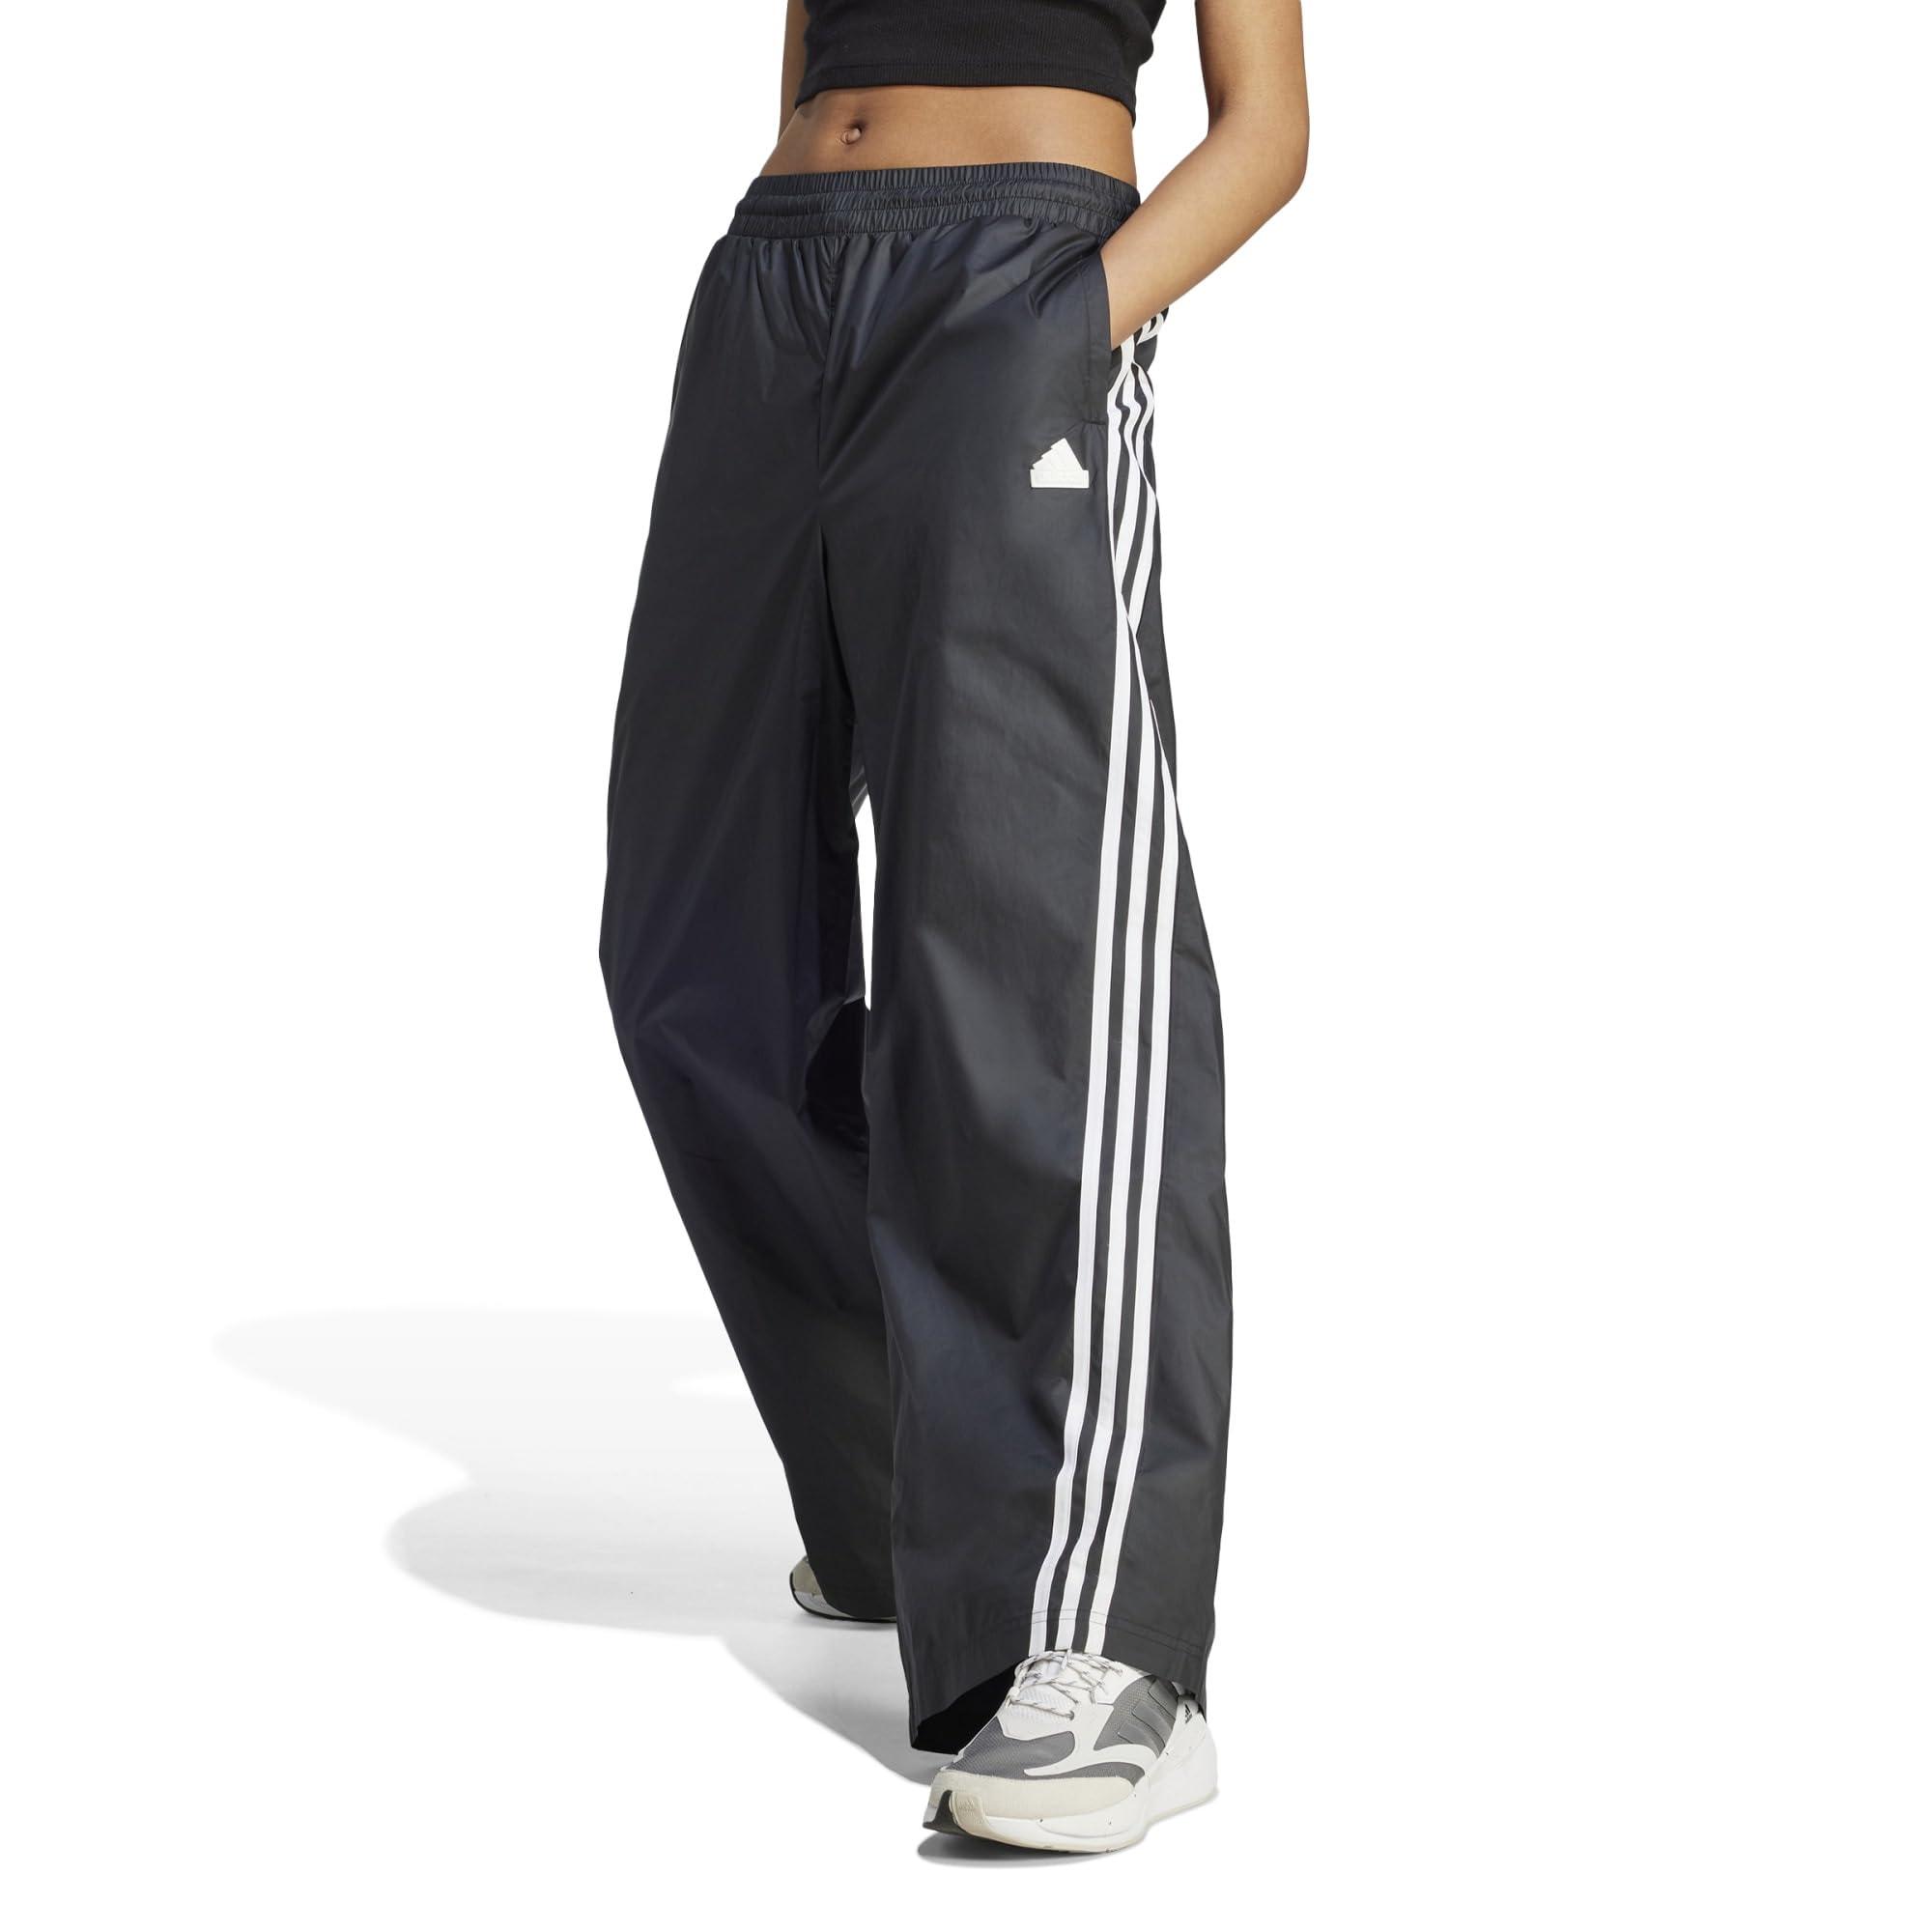 adidas Future Icons 3-stripes Woven Pants in Black | Lyst